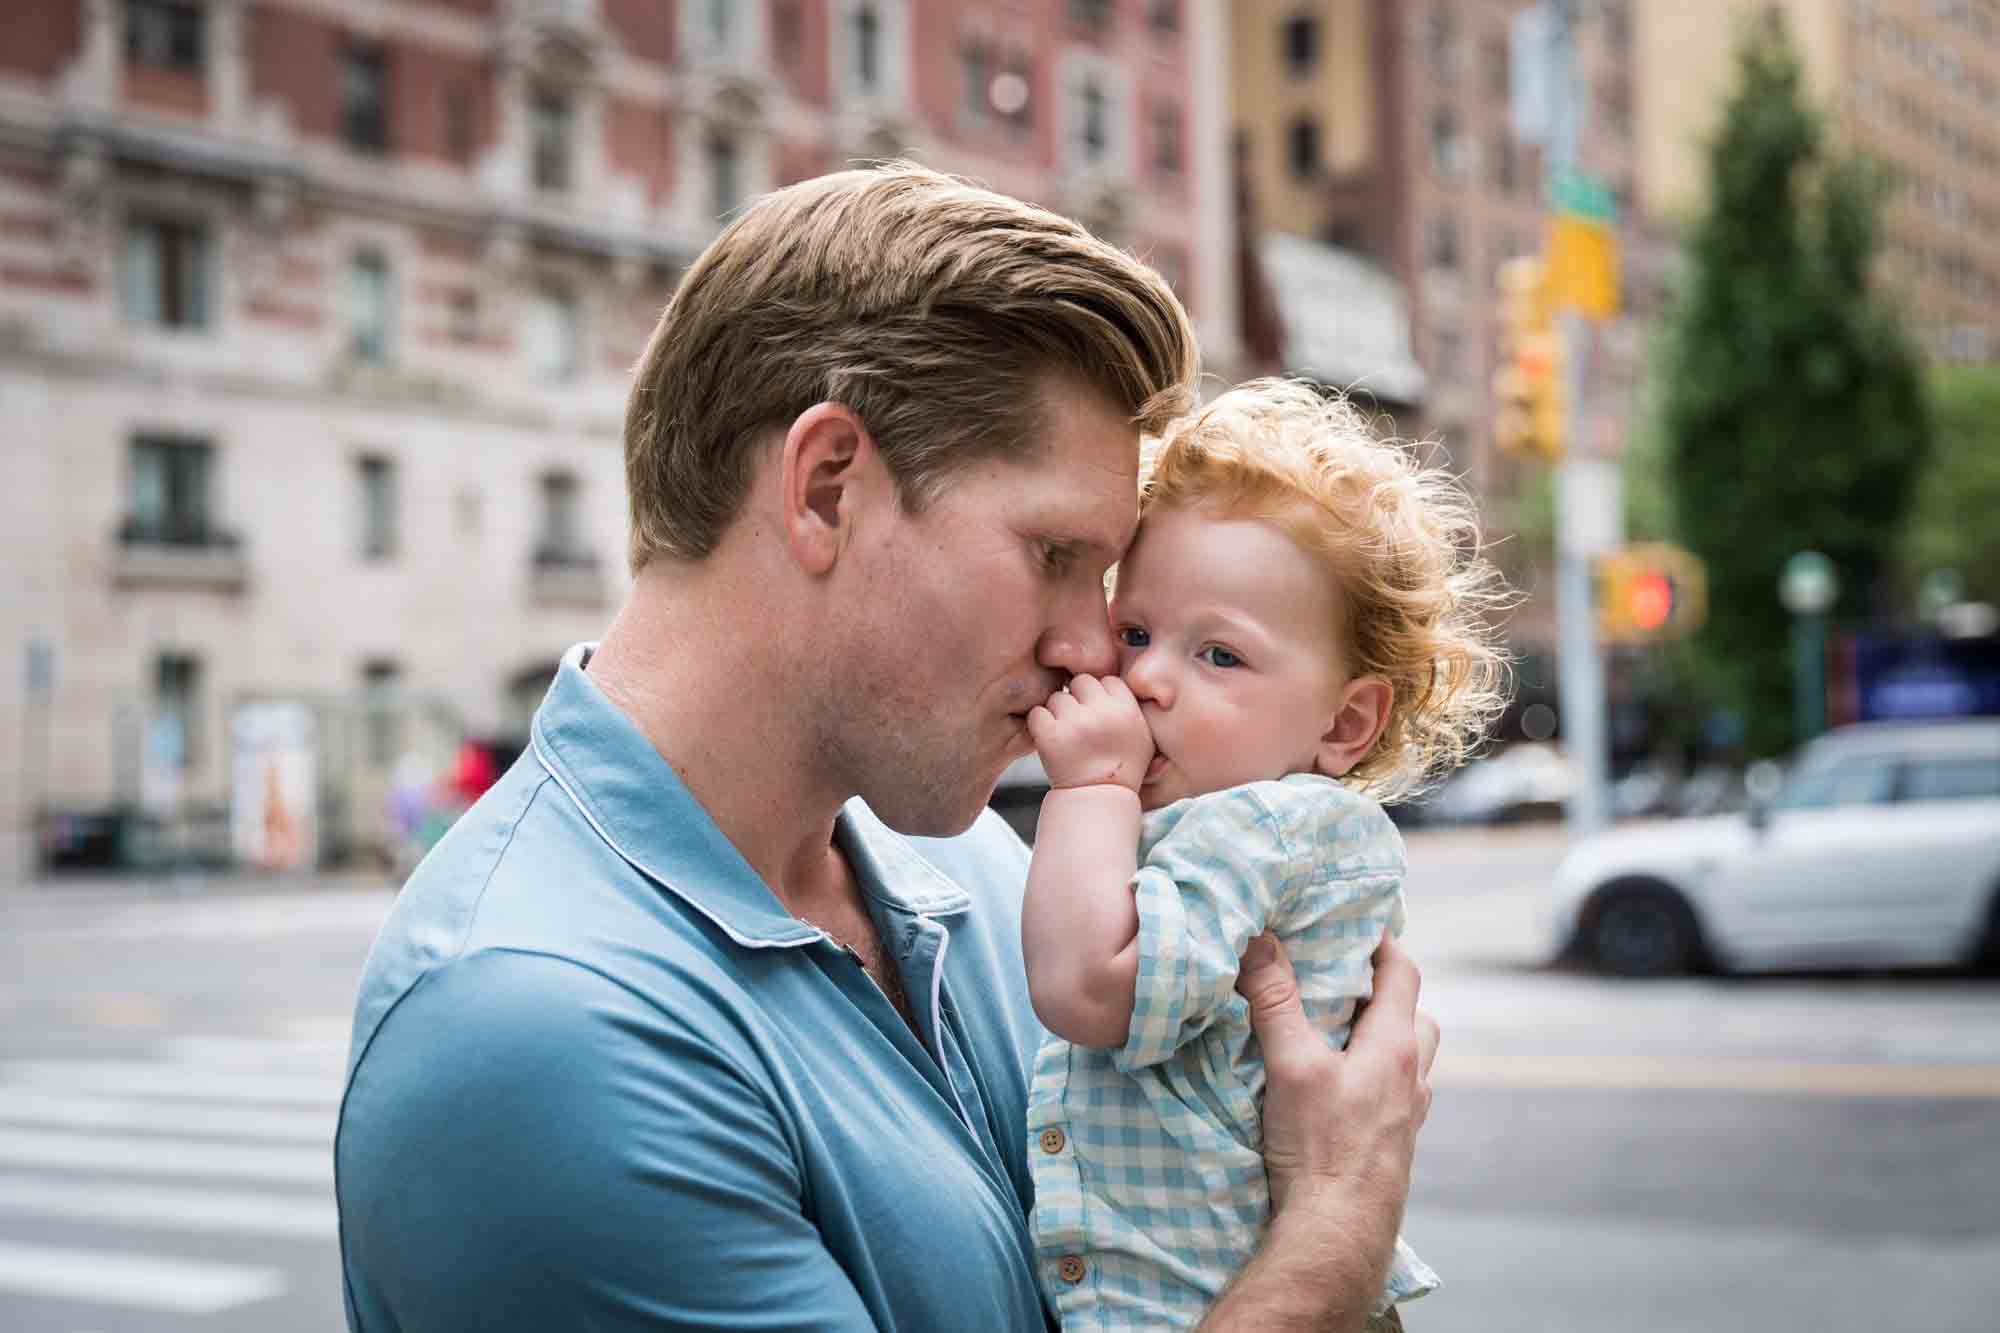 Father wearing blue shirt kissing baby's fist and head pressed up against baby with NYC street in background